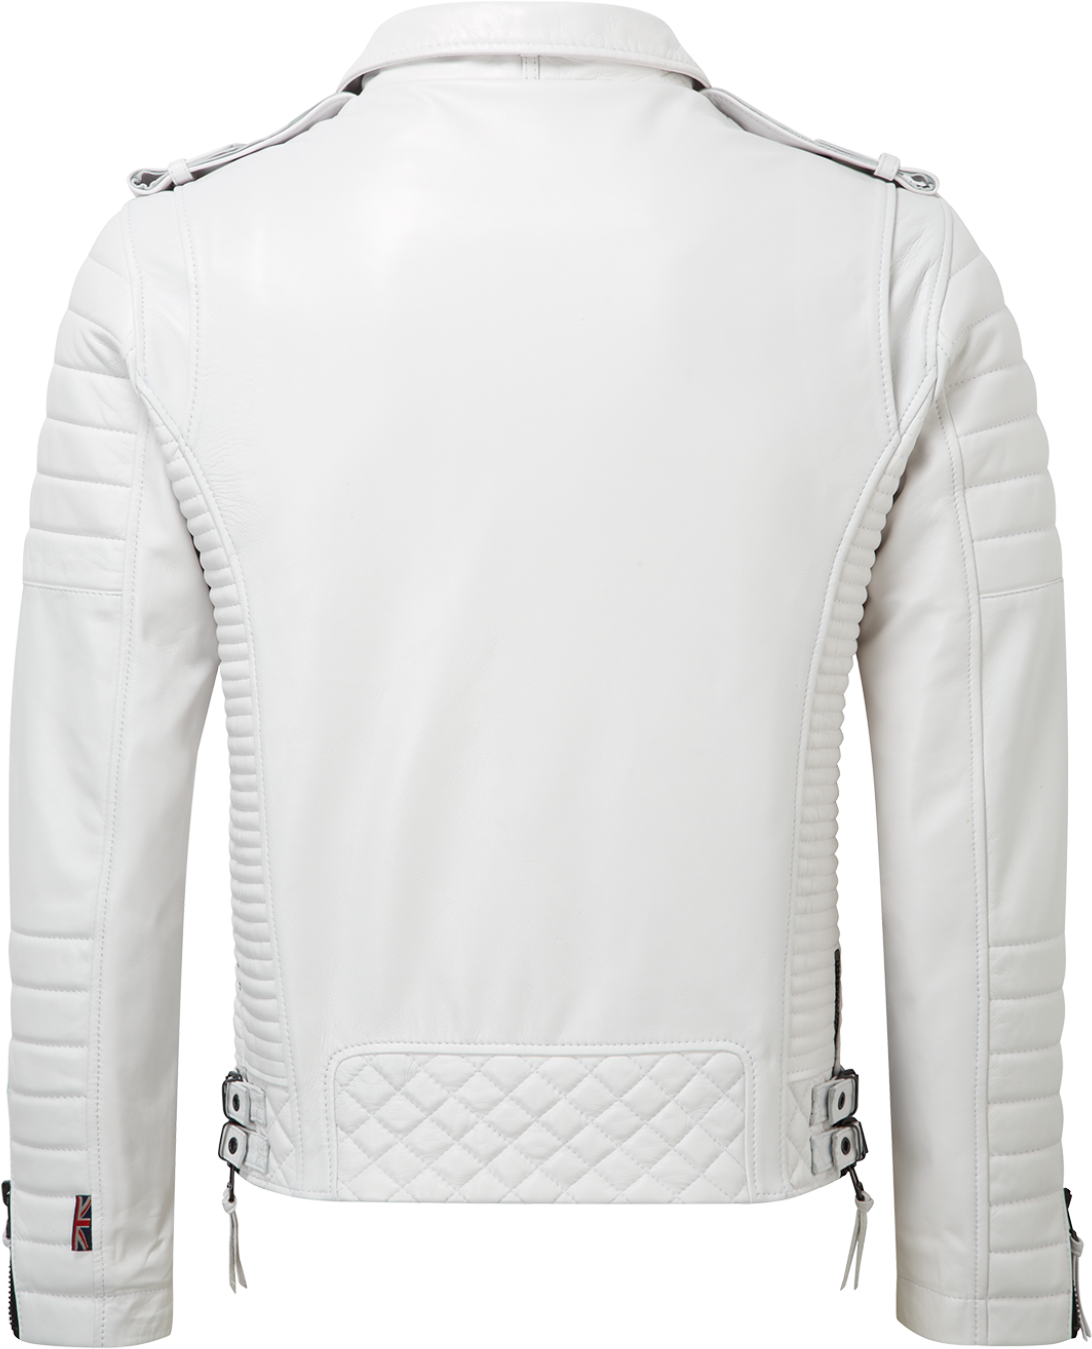 White Leather Motorcycle Jacket Rear View